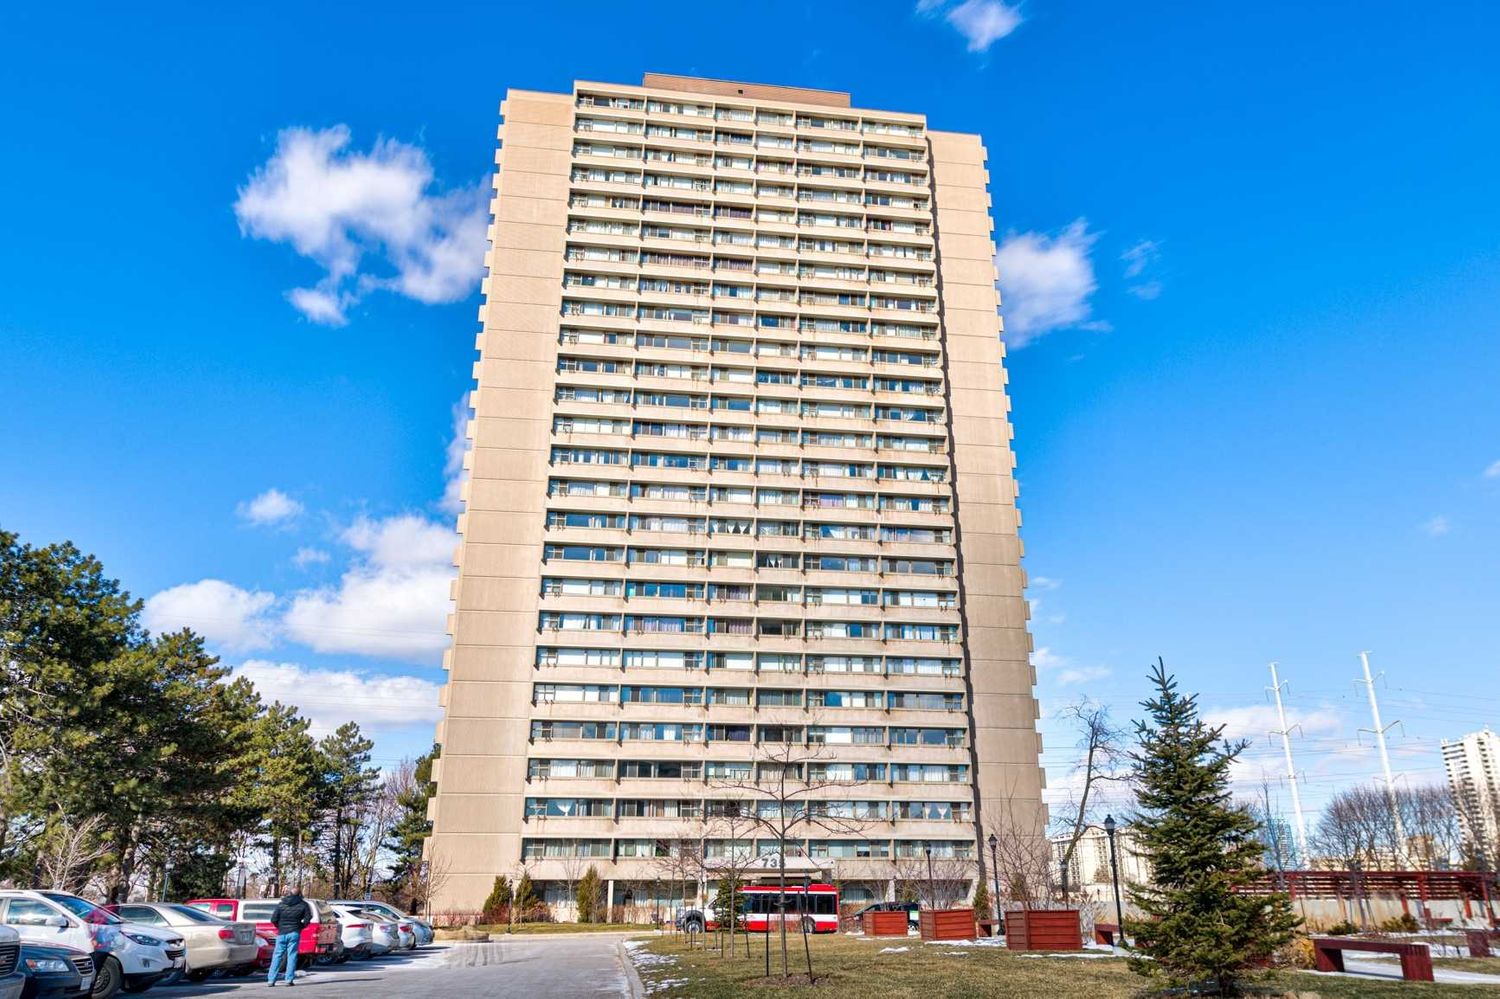 715-735 Don Mills Road. 715 Don Mills Condos is located in  North York, Toronto - image #1 of 2